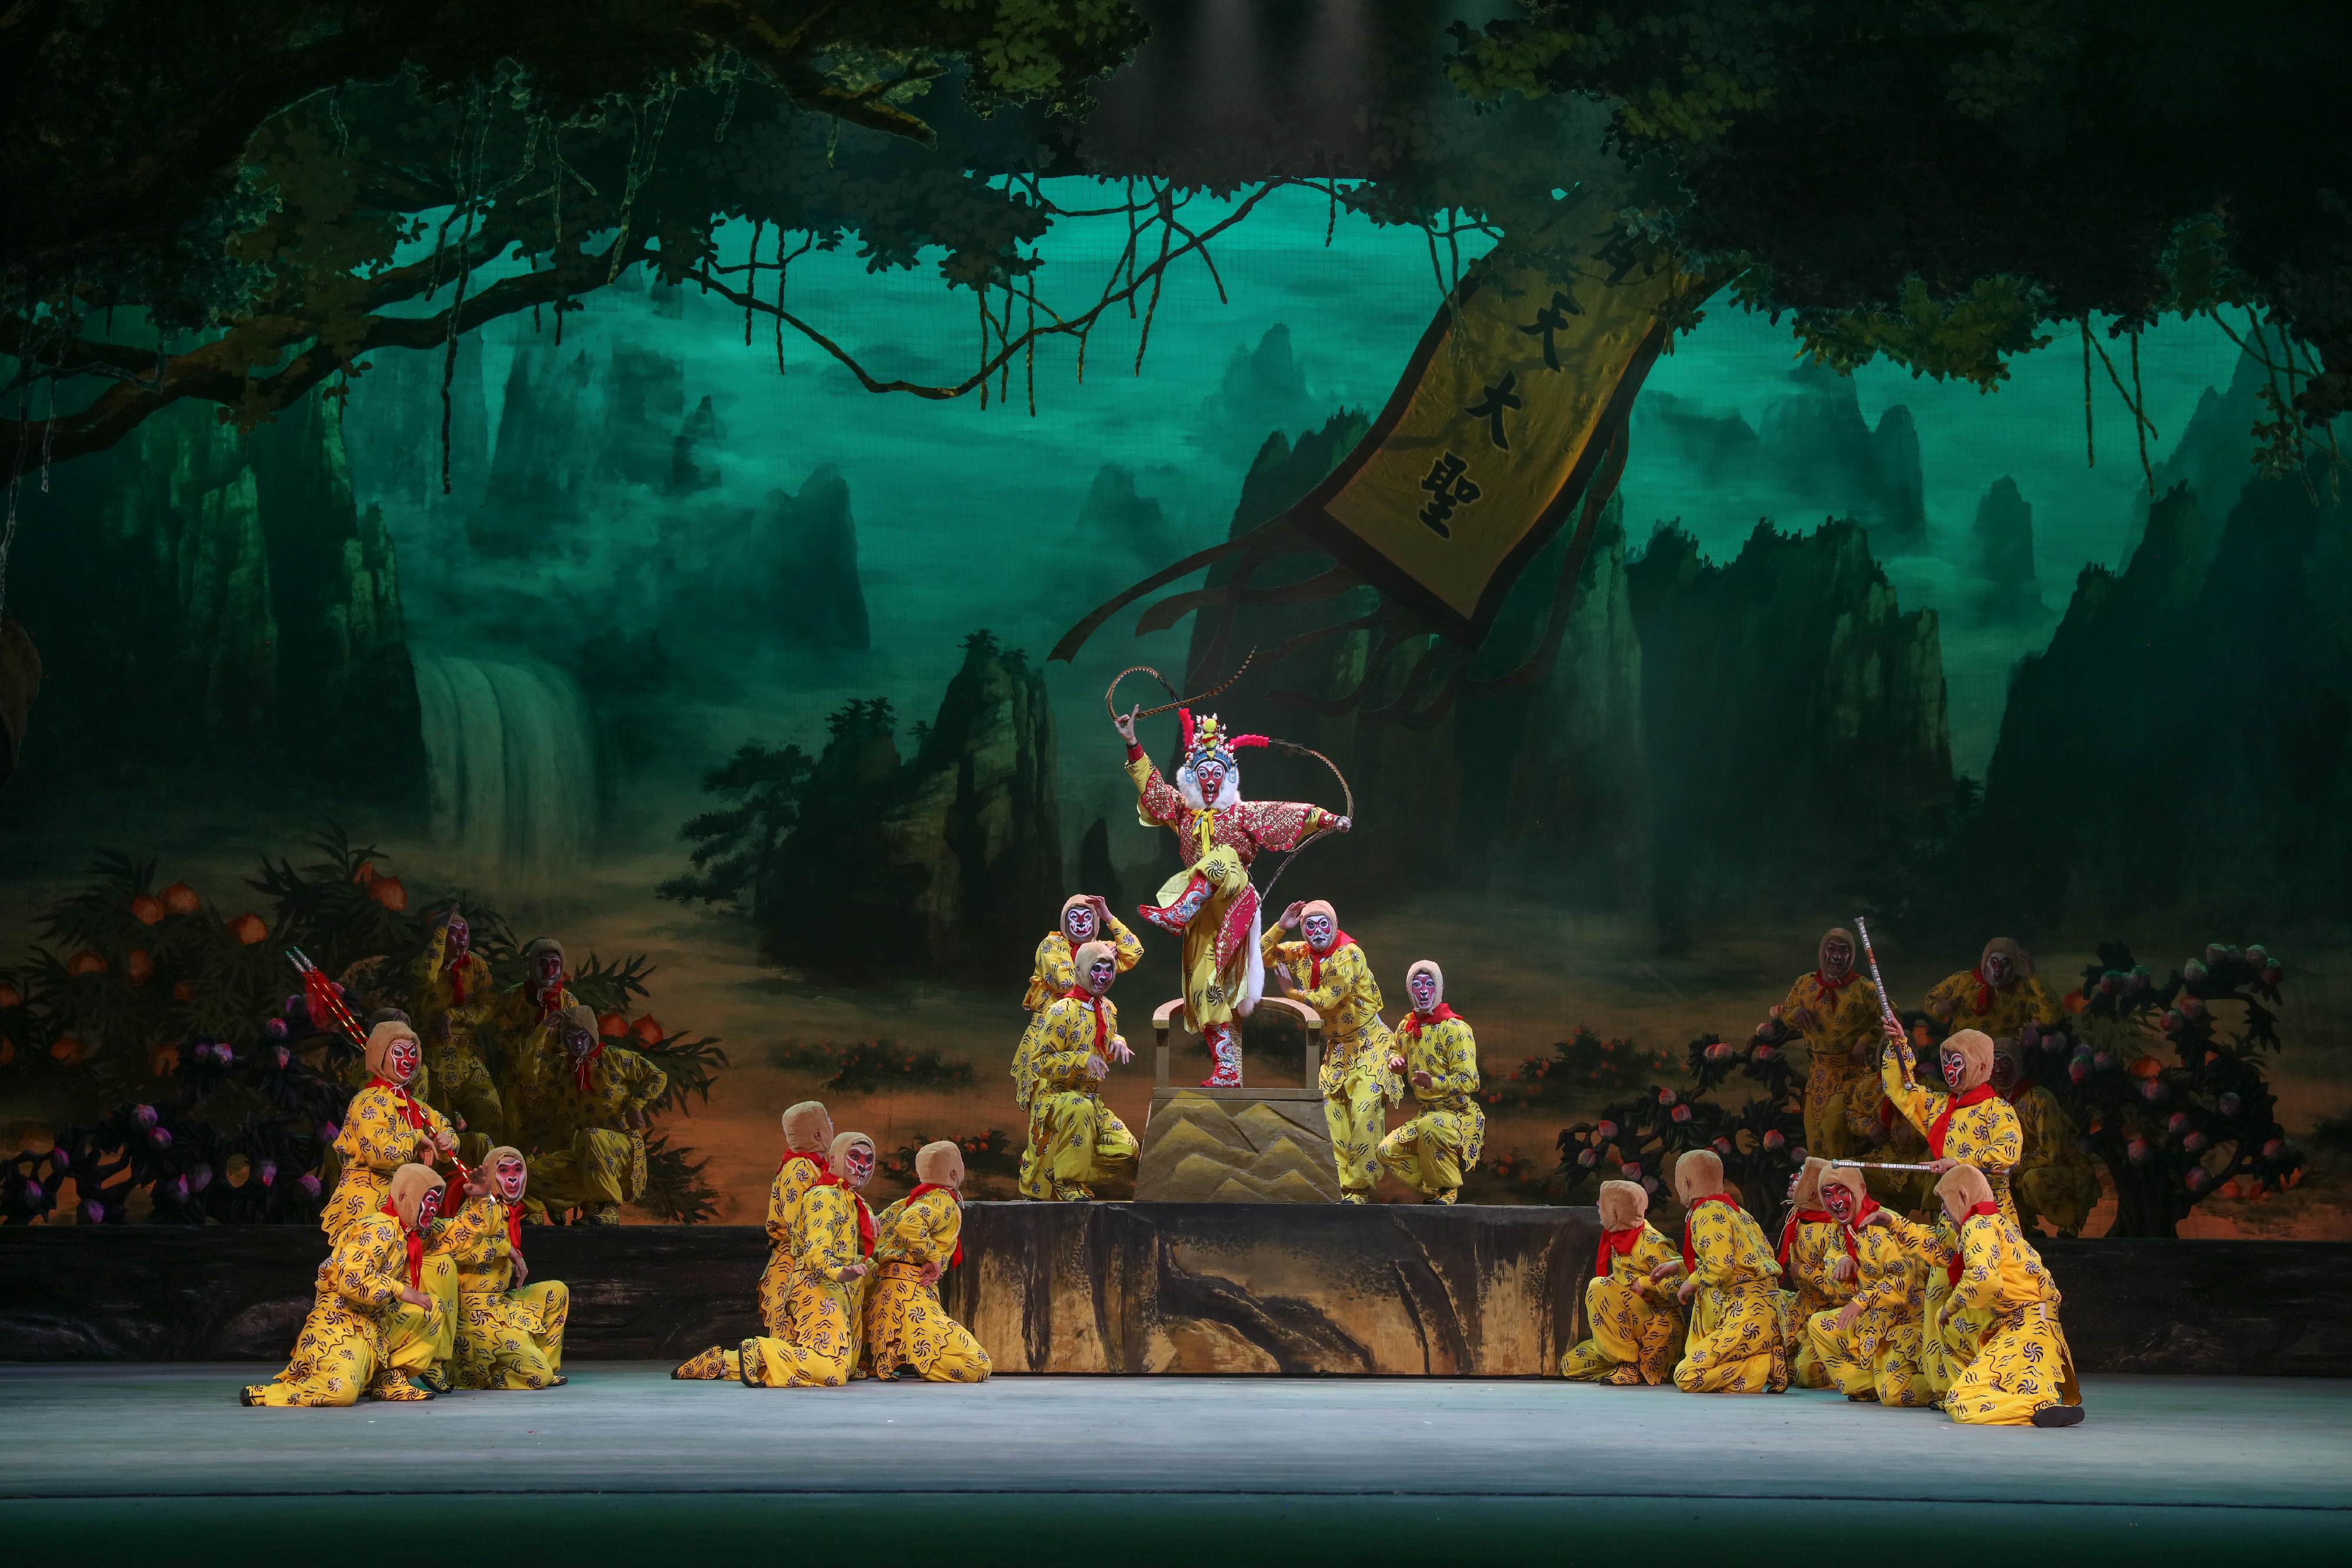 The Zhejiang Wu Opera Research Centre will return to Hong Kong to stage three Wu opera performances in late July at the inaugural Chinese Culture Festival, organised by the Leisure and Cultural Services Department. Photo shows a scene from "Sun Wu Kong Thrice Beat the Bony Demon".
